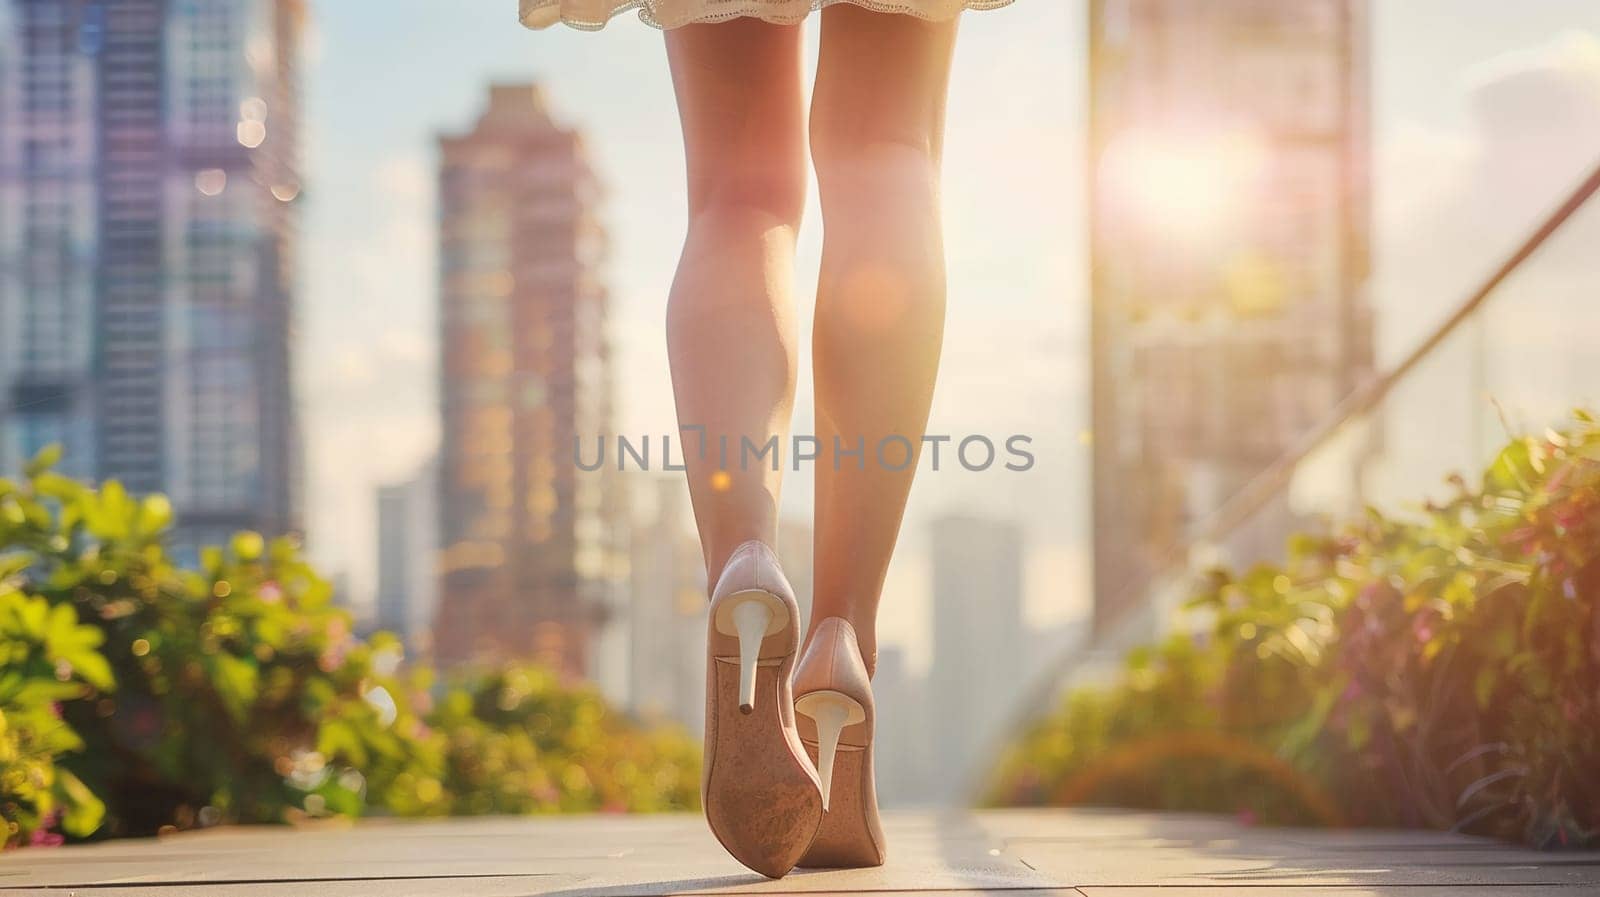 Close-up view of stylish woman's legs in high heels, walking along urban street. Sunlight flares background modern buildings.